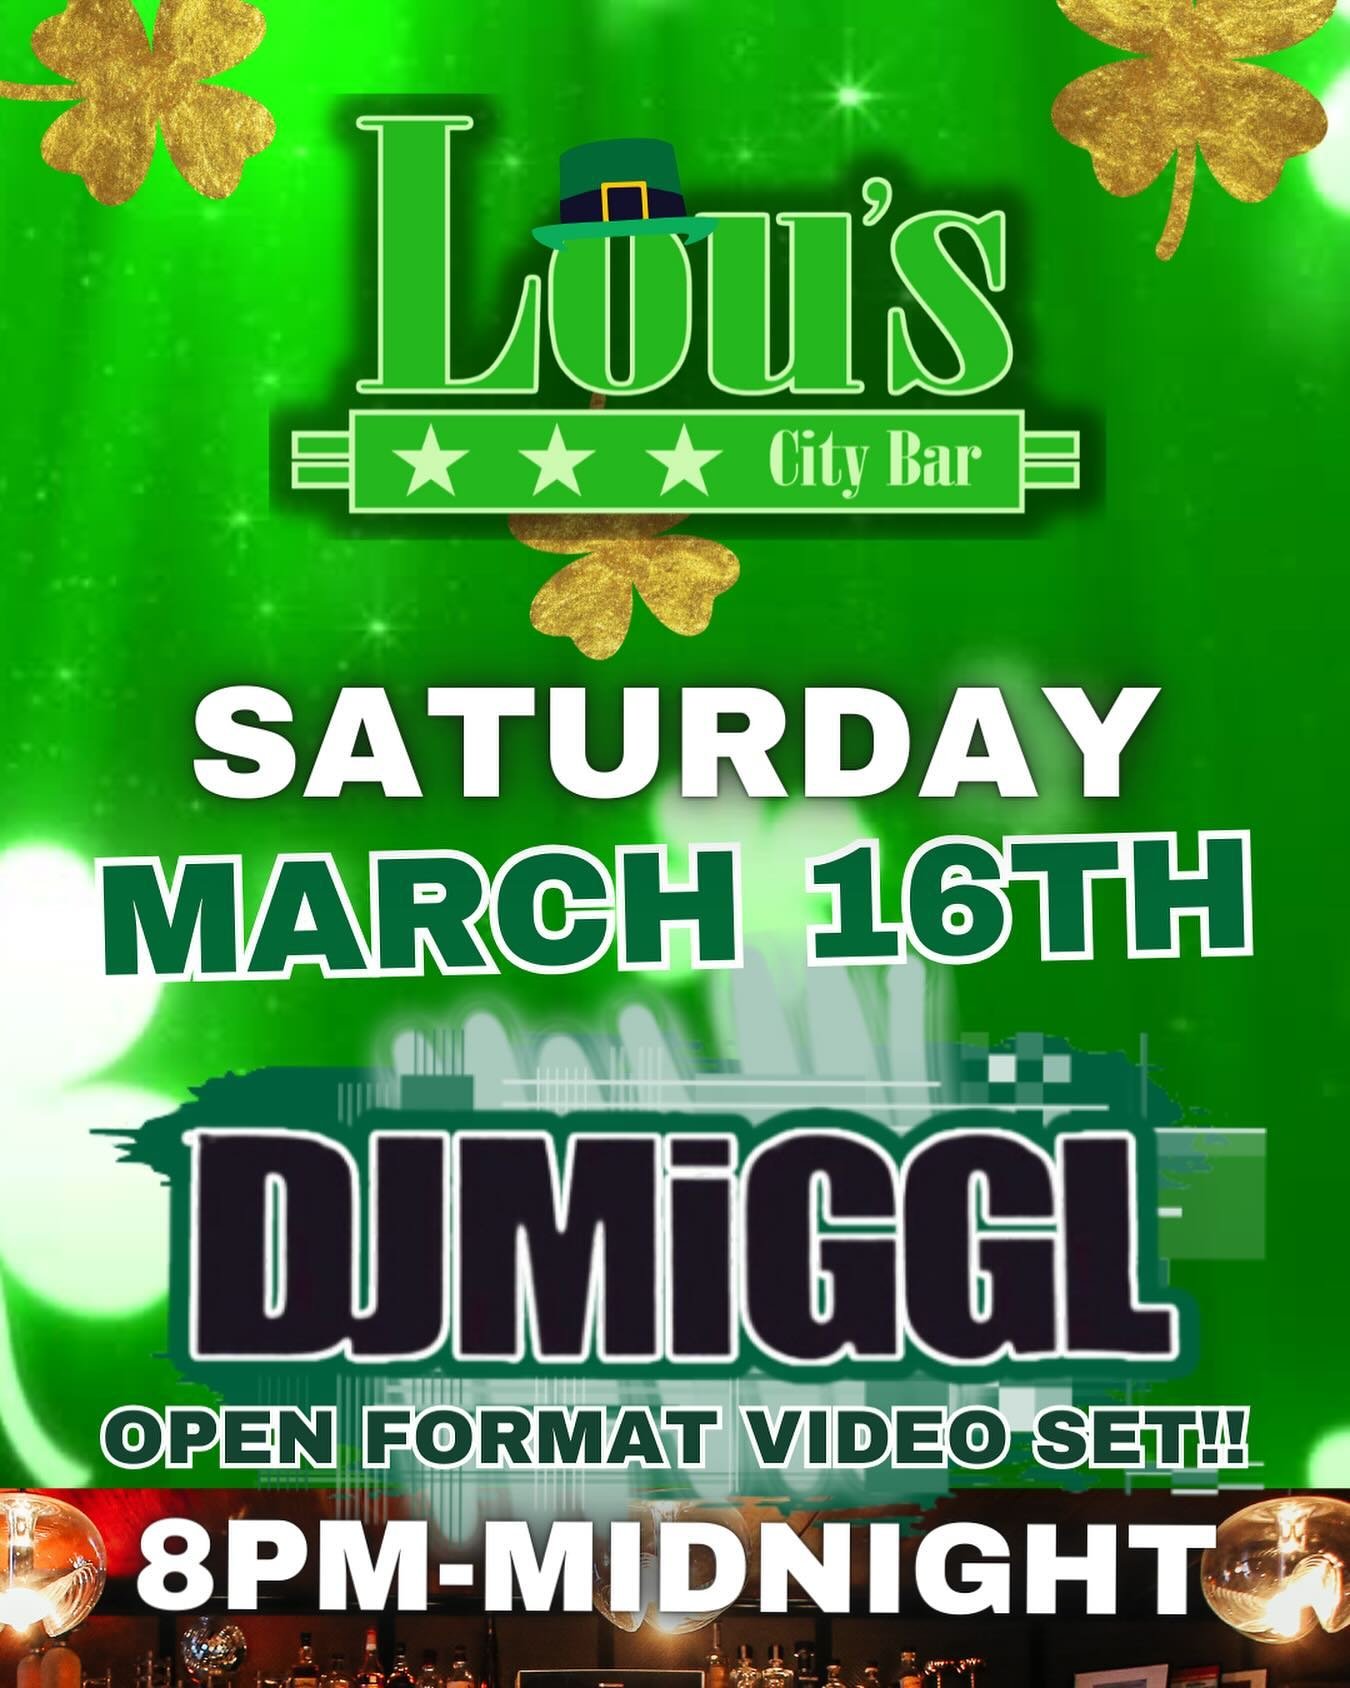 Join us all weekend for St. Paddy&rsquo;s celebrations, starting Saturday night at 8pm with an all new DJ night ft. @djmiggl spinning hits till close and showing the music videos on our TVs! Then Sunday, grab a pint and a whiskey at the patio bar and